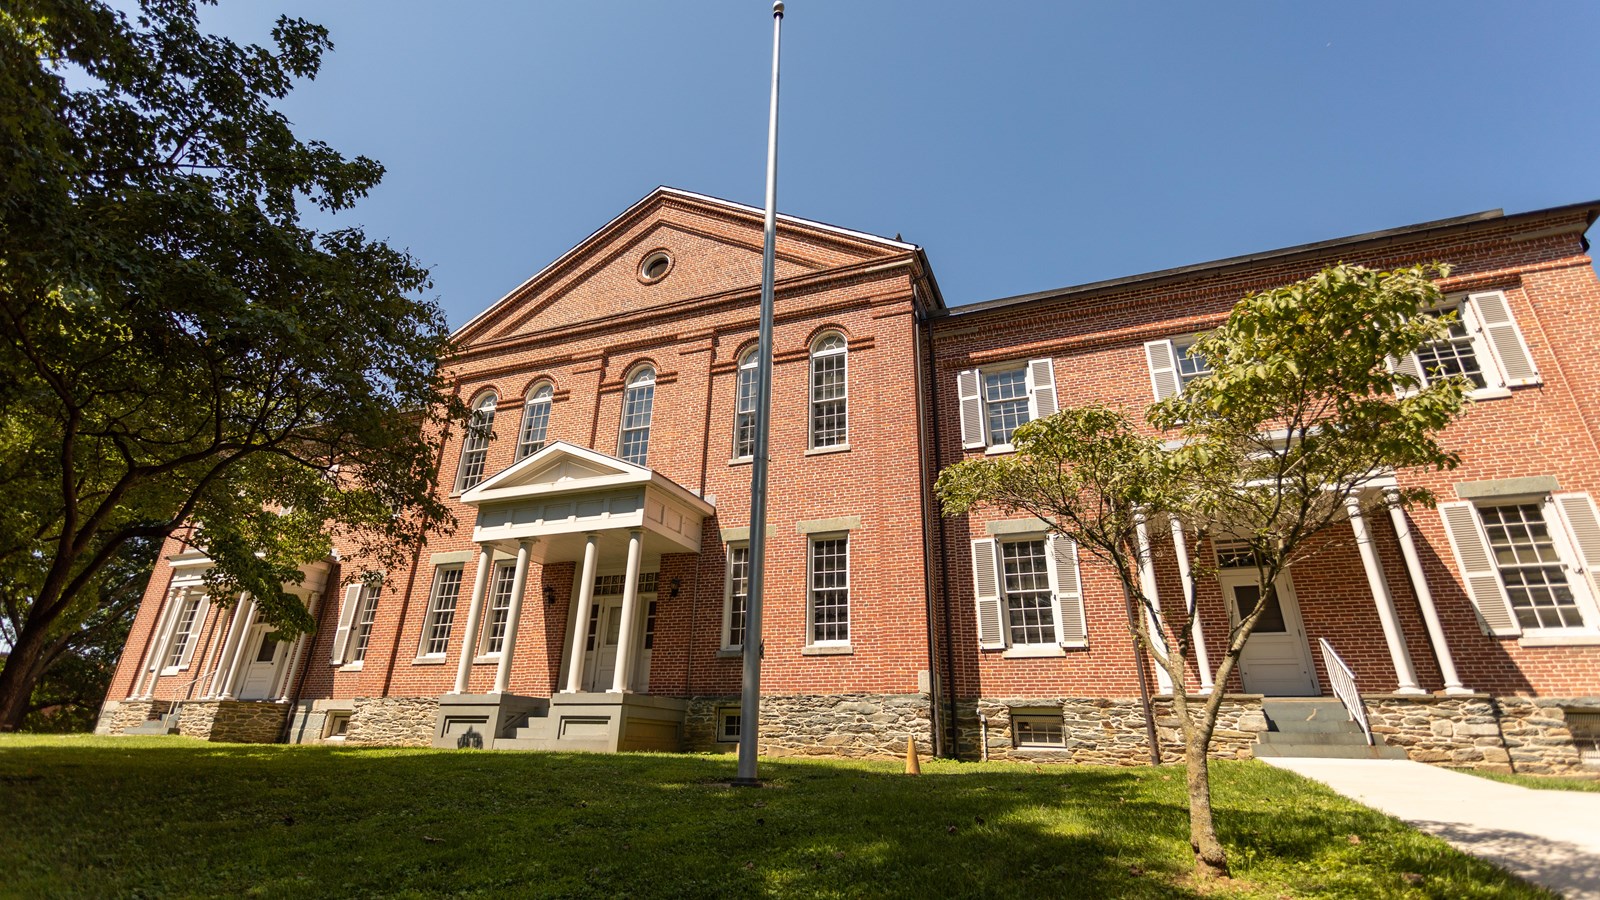 Anthony Hall, a large brick building on the campus of Storer College